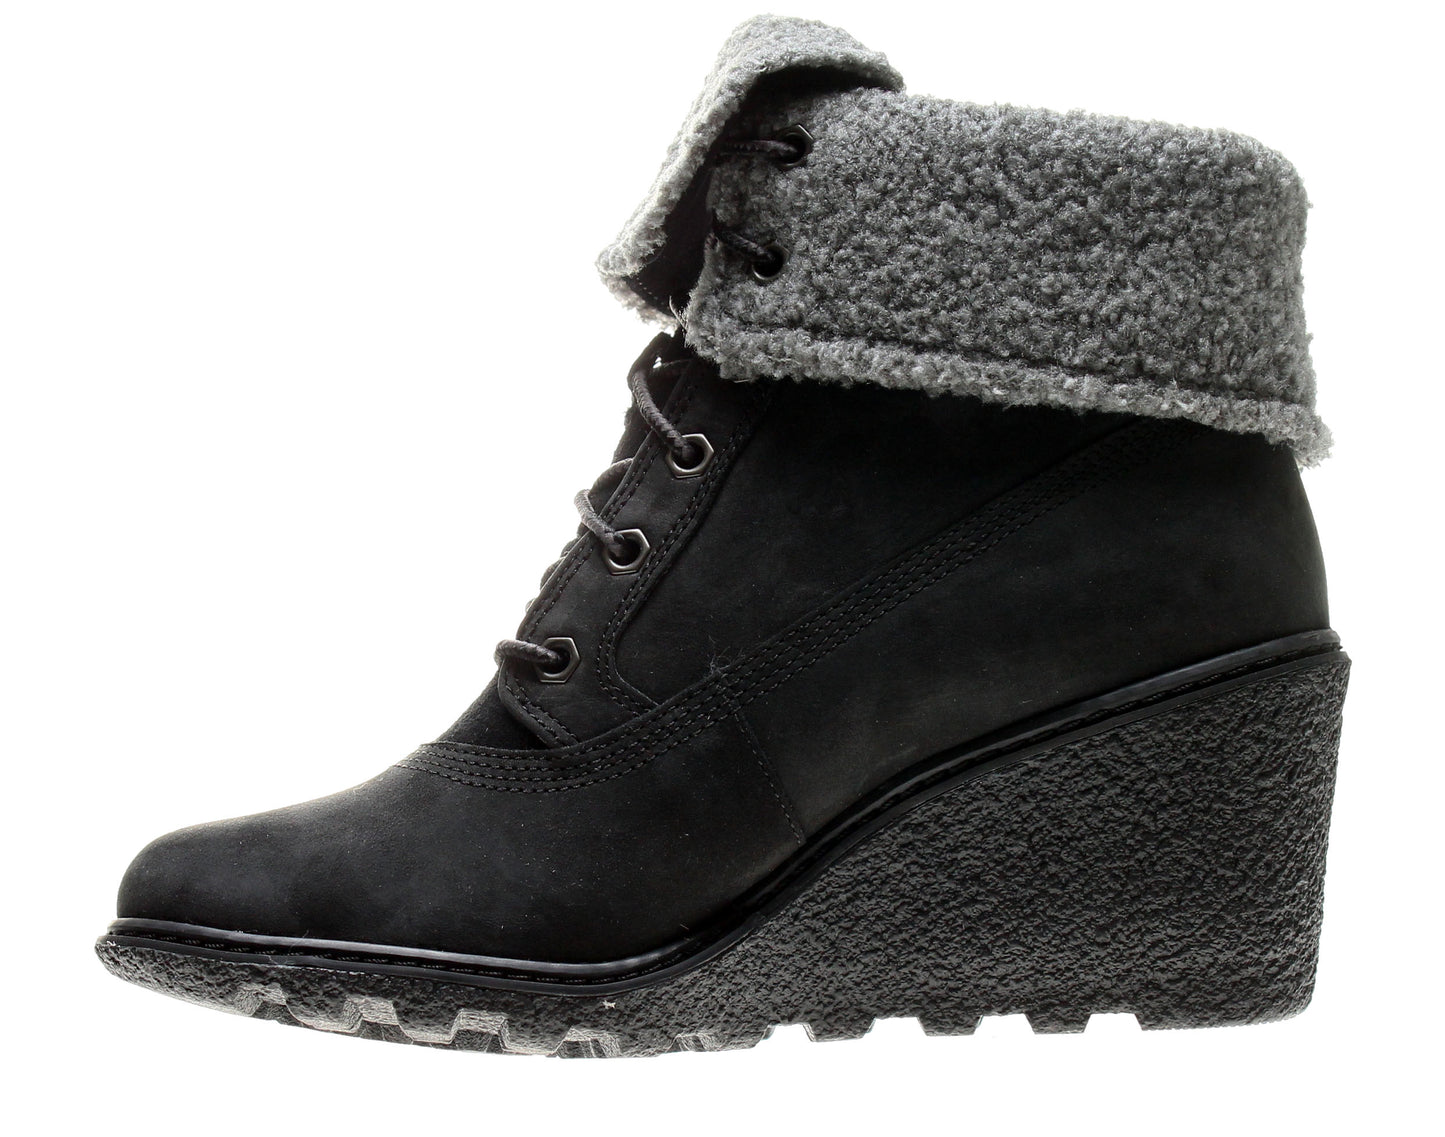 Timberland Earthkeepers Amston Roll-Top Women's Wedge Boots